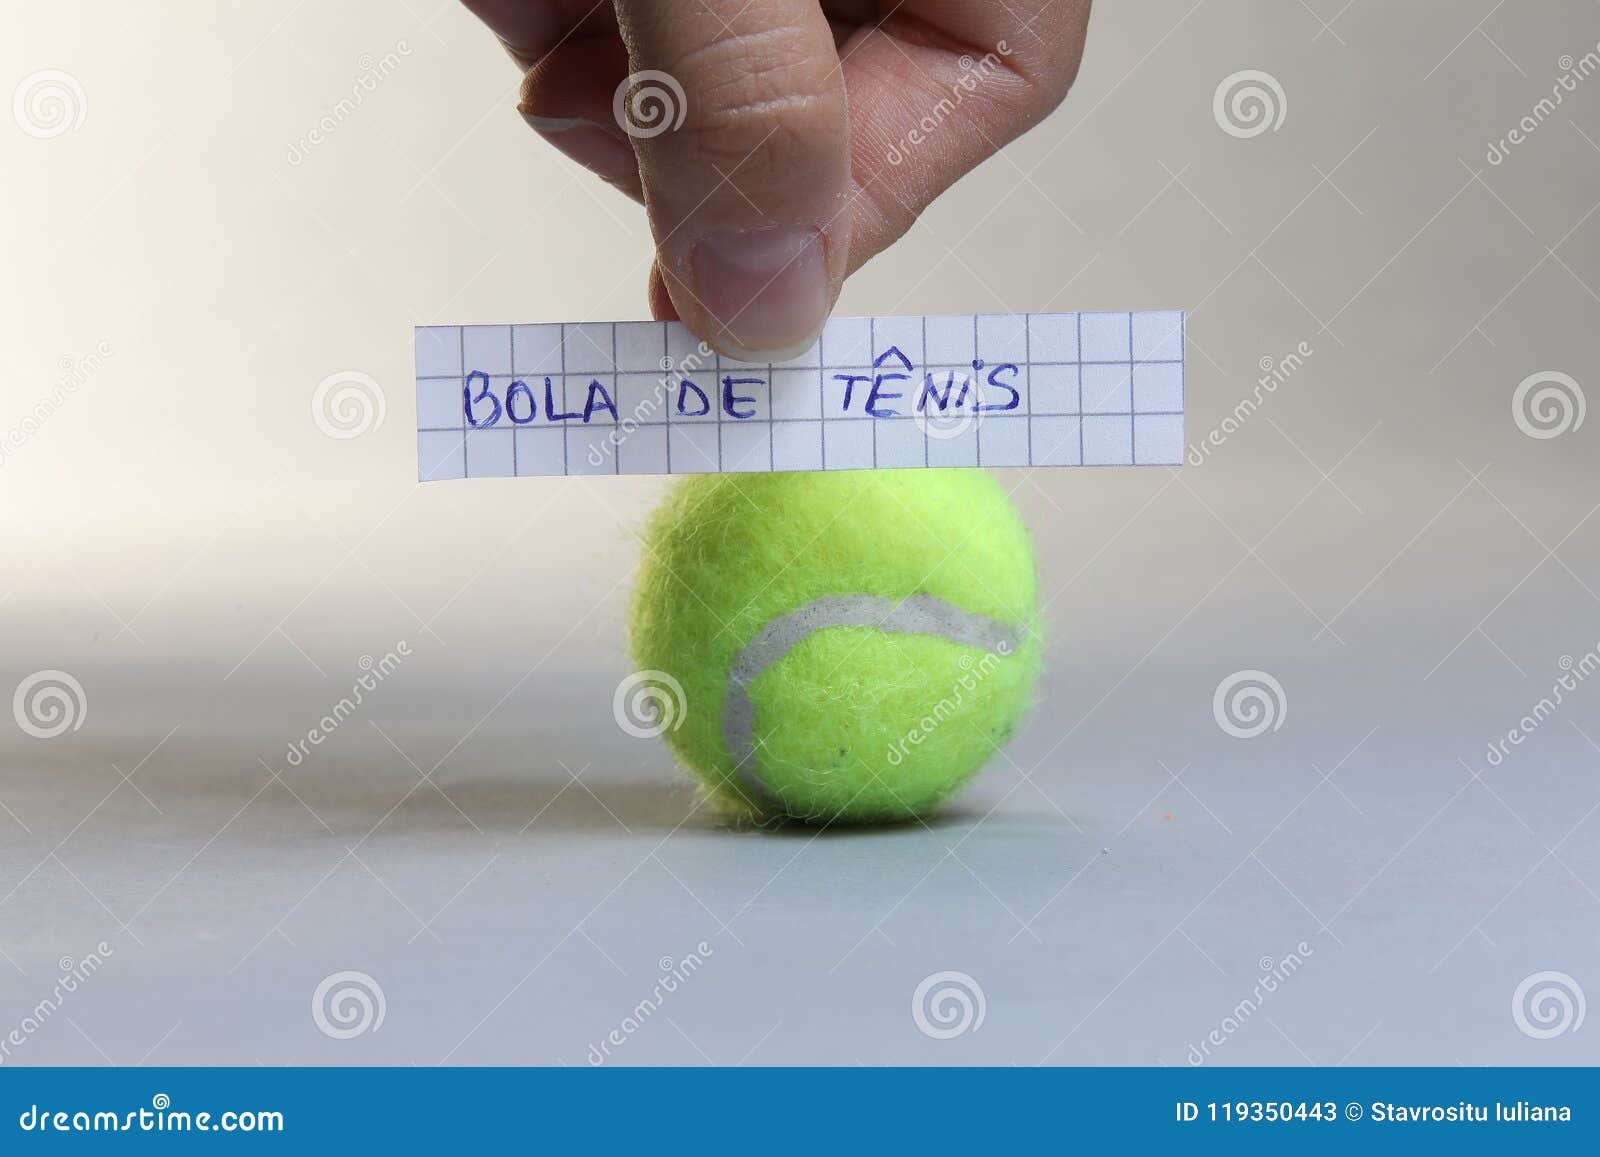 tennis ball word written on a piece of paper, bola de tenis in spanish language